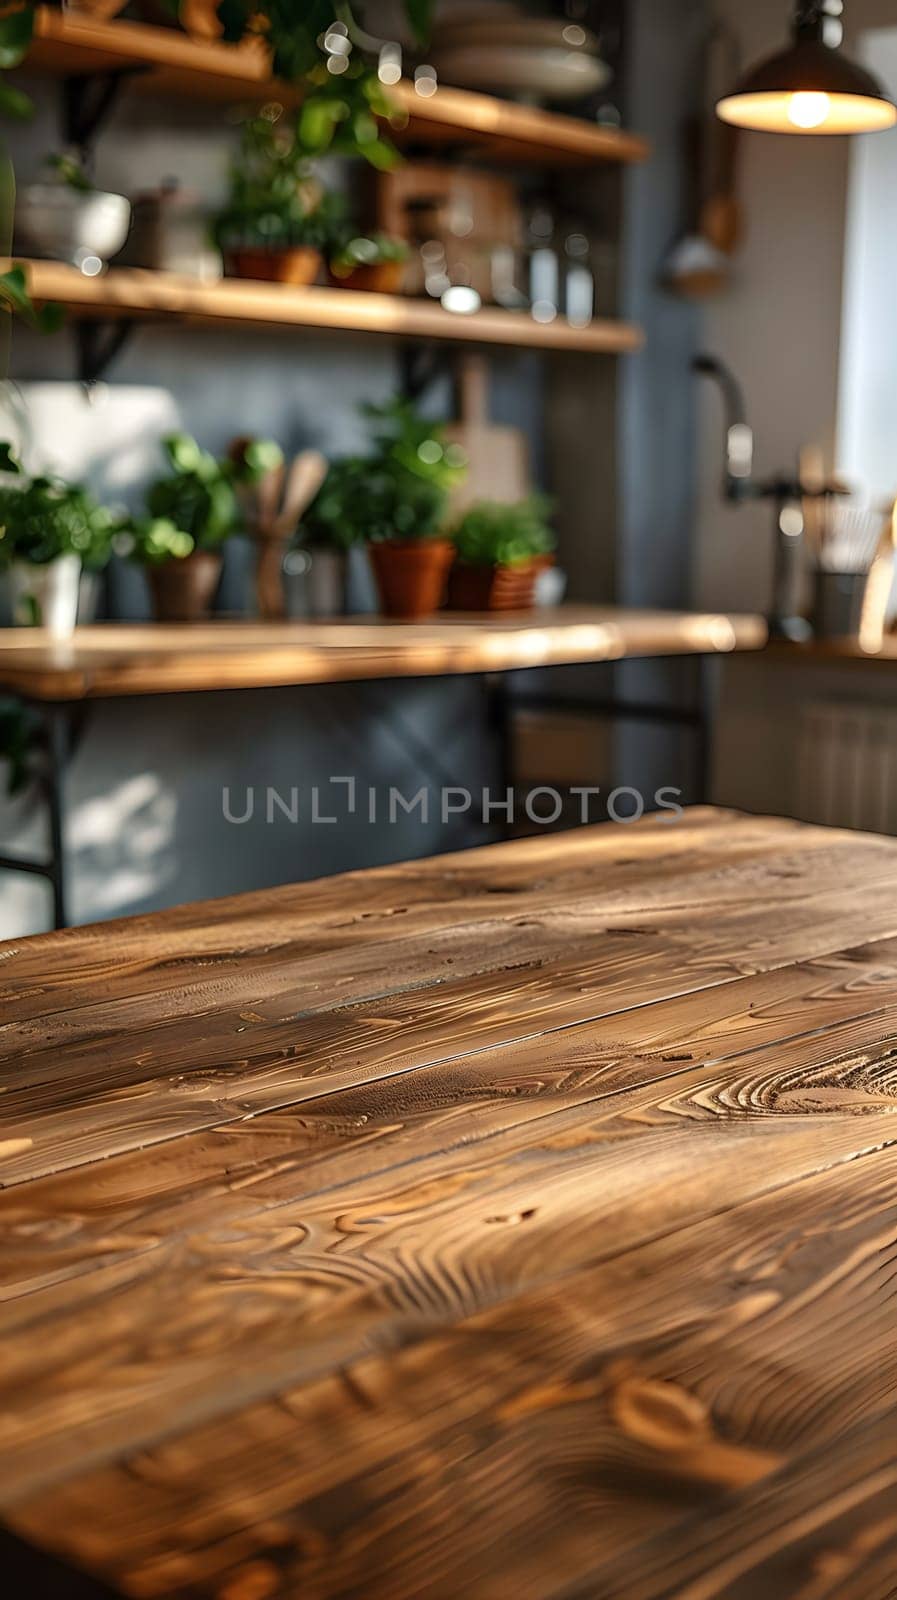 A wooden table with potted plants on shelves in a kitchen by Nadtochiy